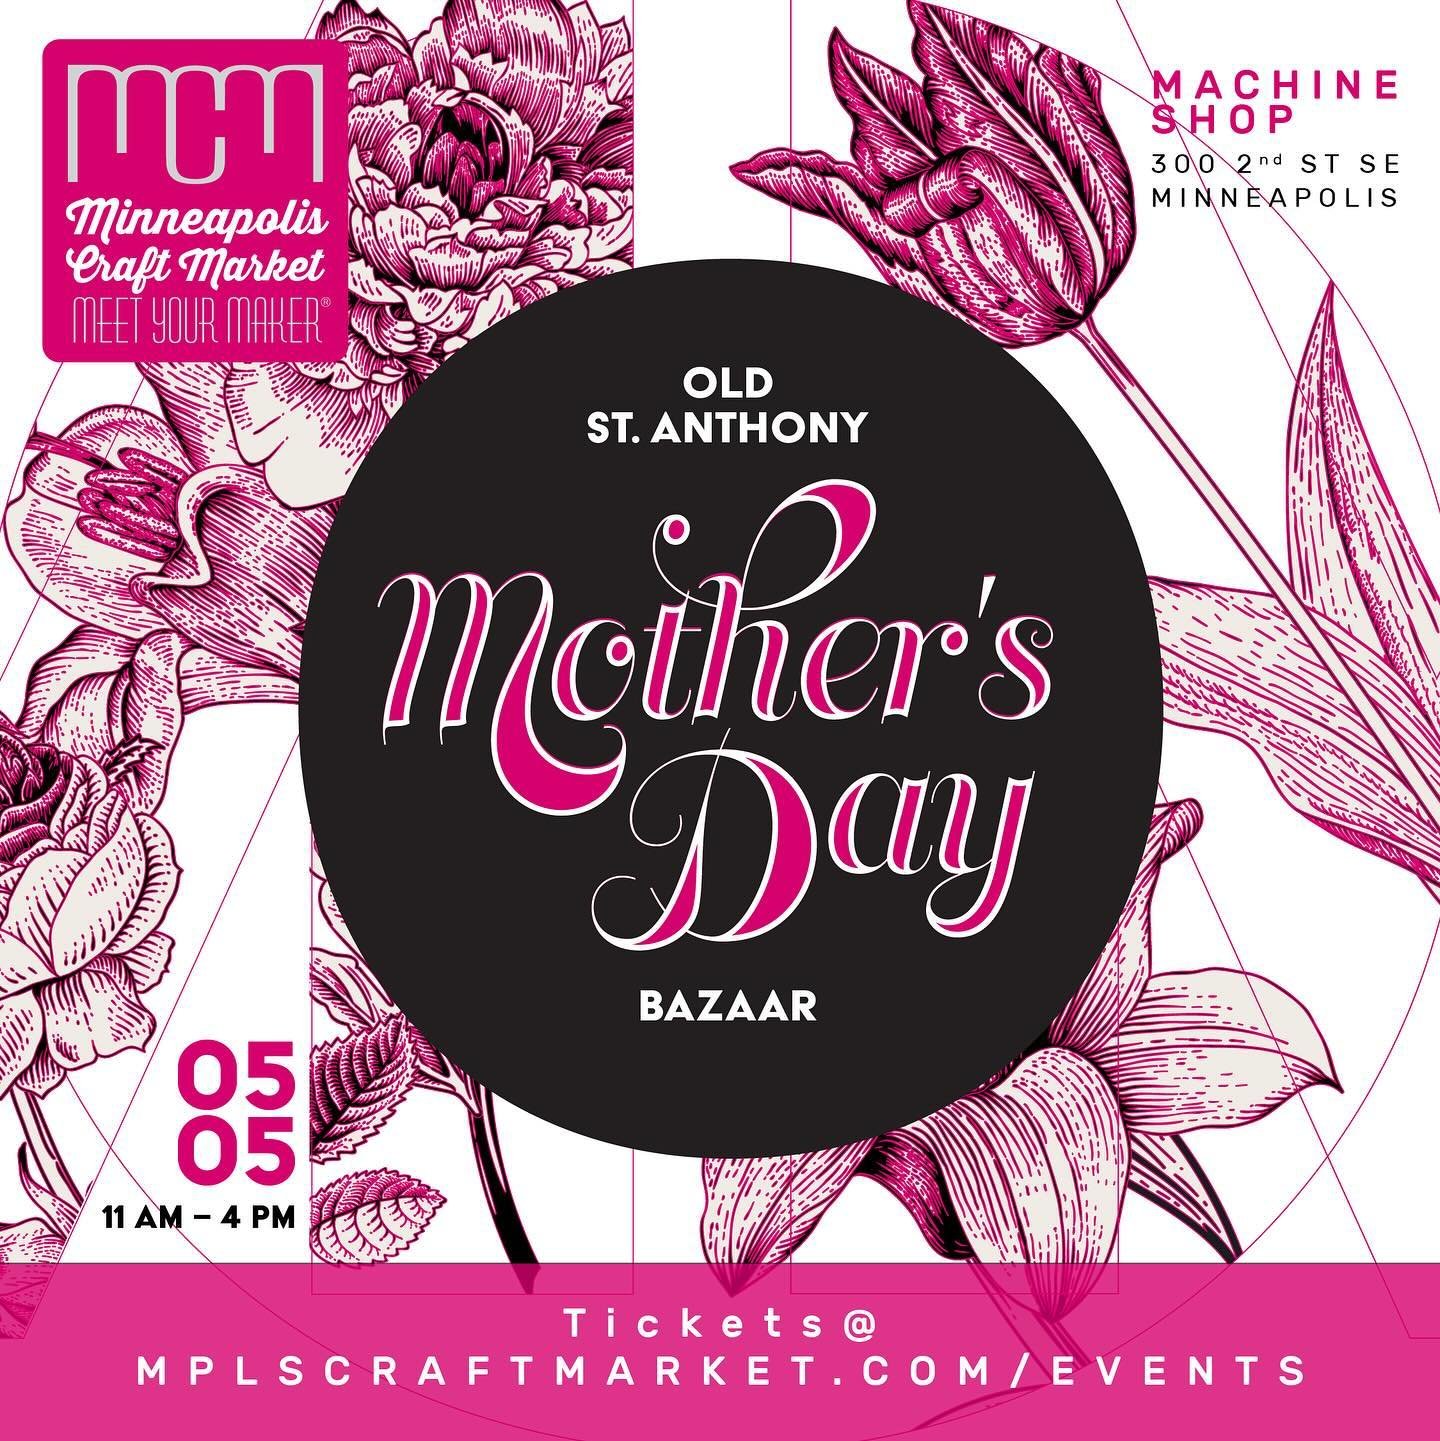 Make Mother&rsquo;s Day💐 extra special this year and shop at the Old St. Anthony Mother&rsquo;s Day Market on May 5th! Don&rsquo;t stress about finding the perfect 💝gift,  there&rsquo;s a little something for every Mom. 💐 

✨ATTN: Makers we have a